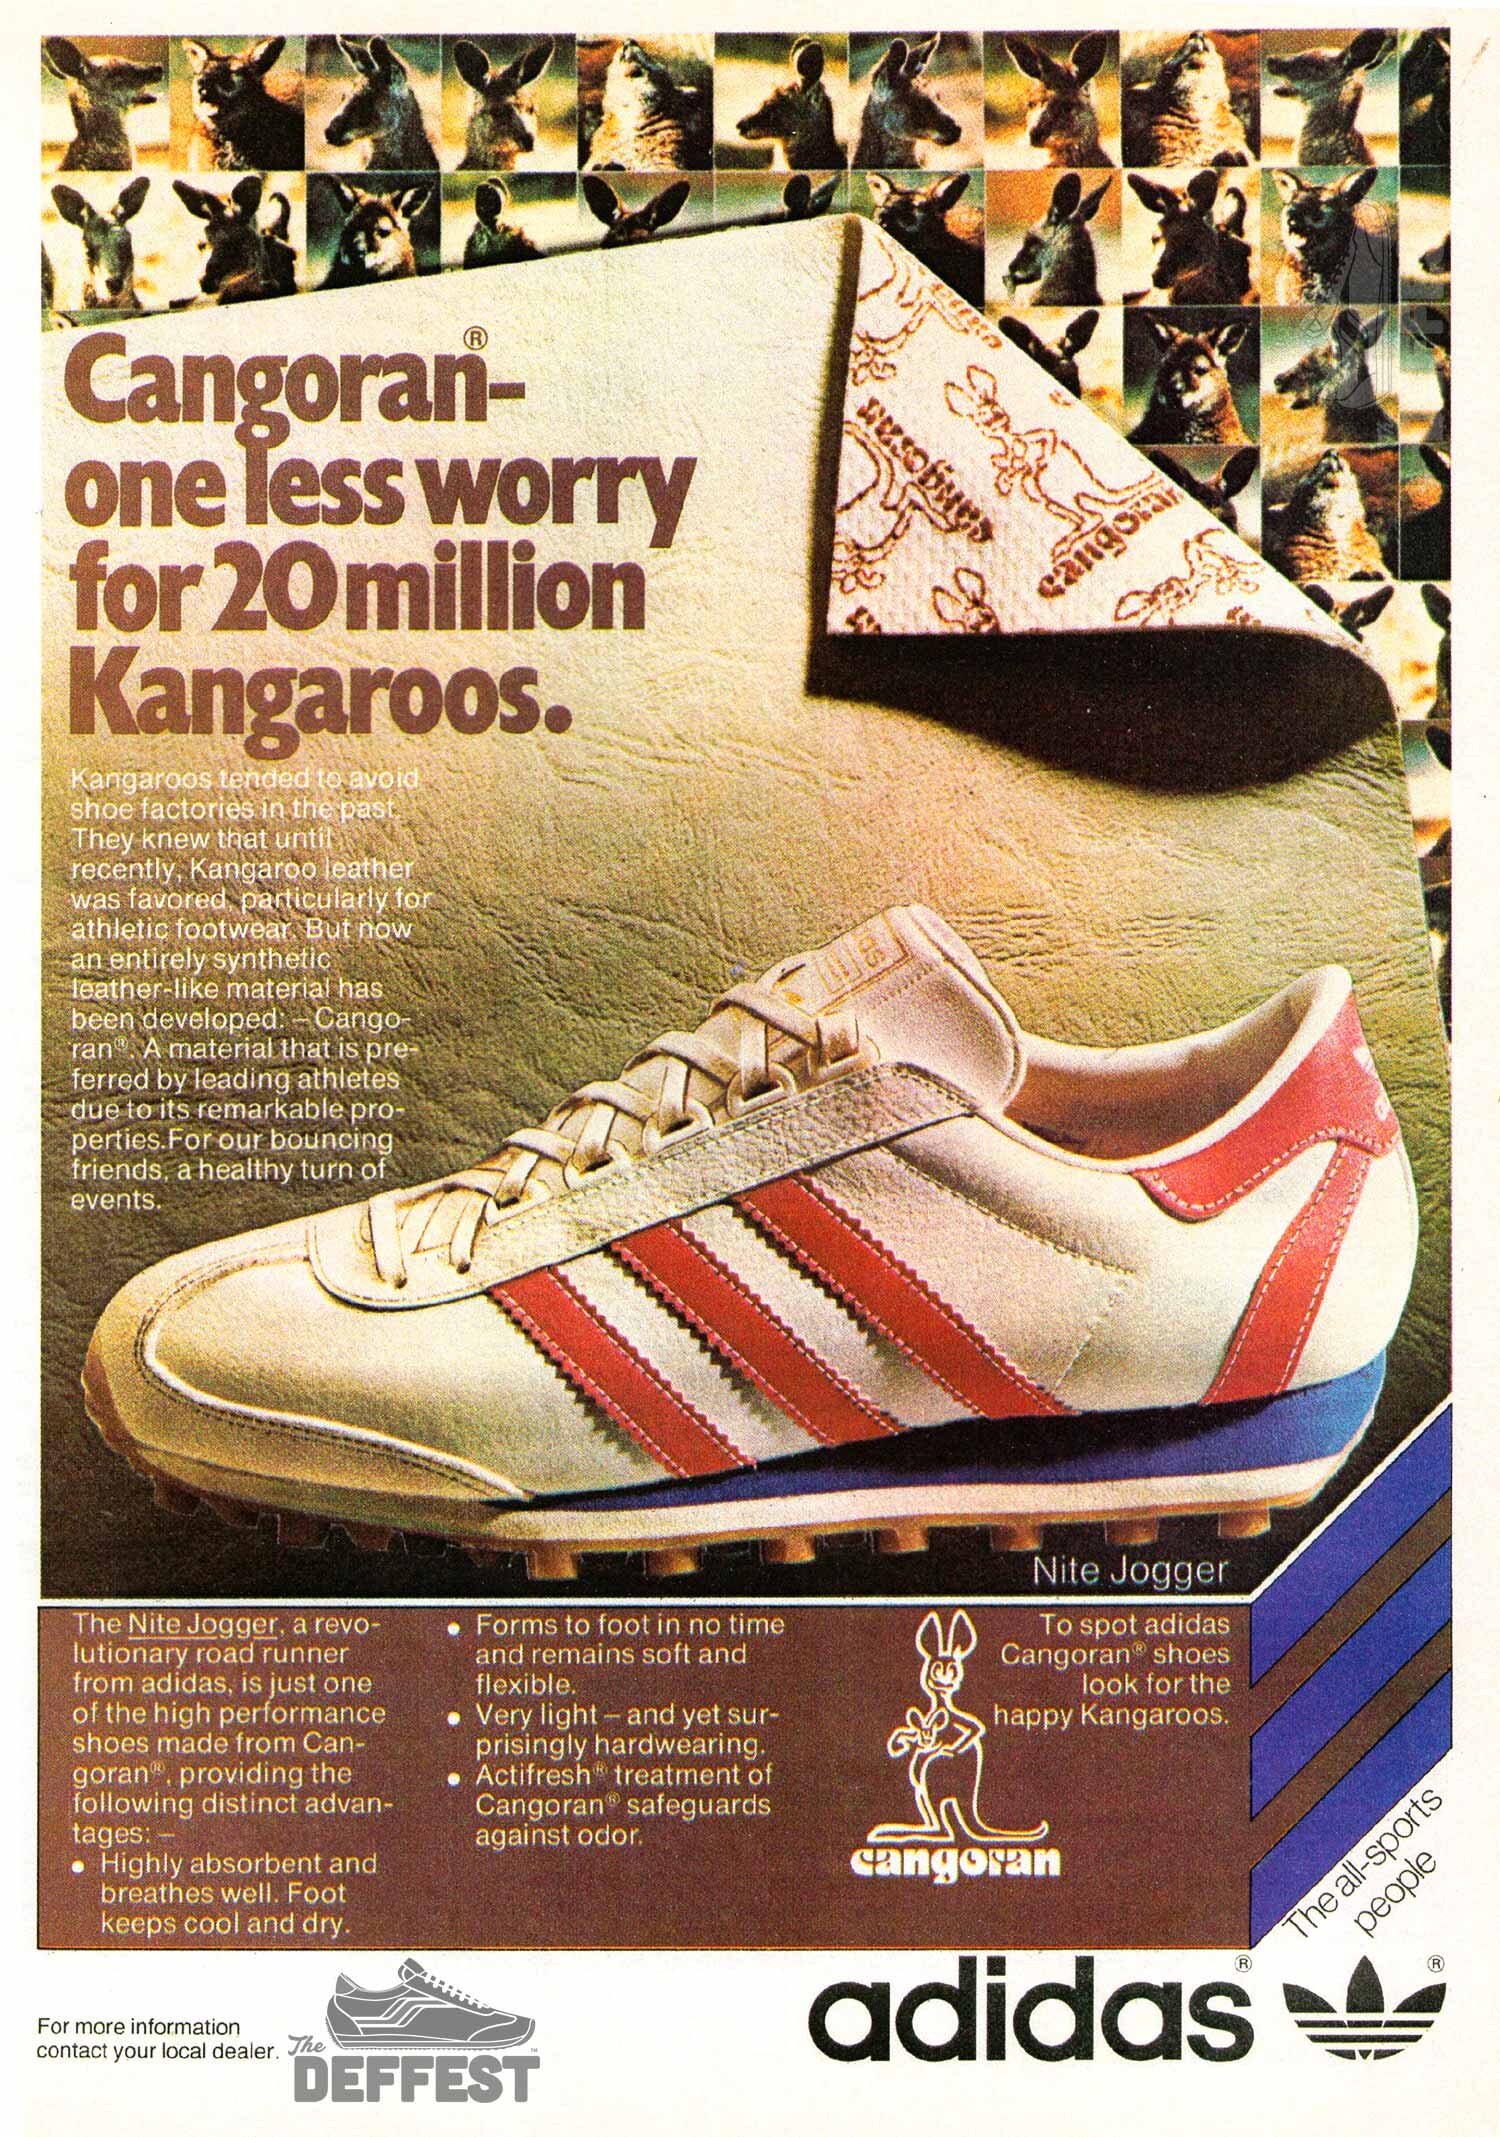 vintage adidas sneakers — The Deffest®. A vintage and retro ... خرز